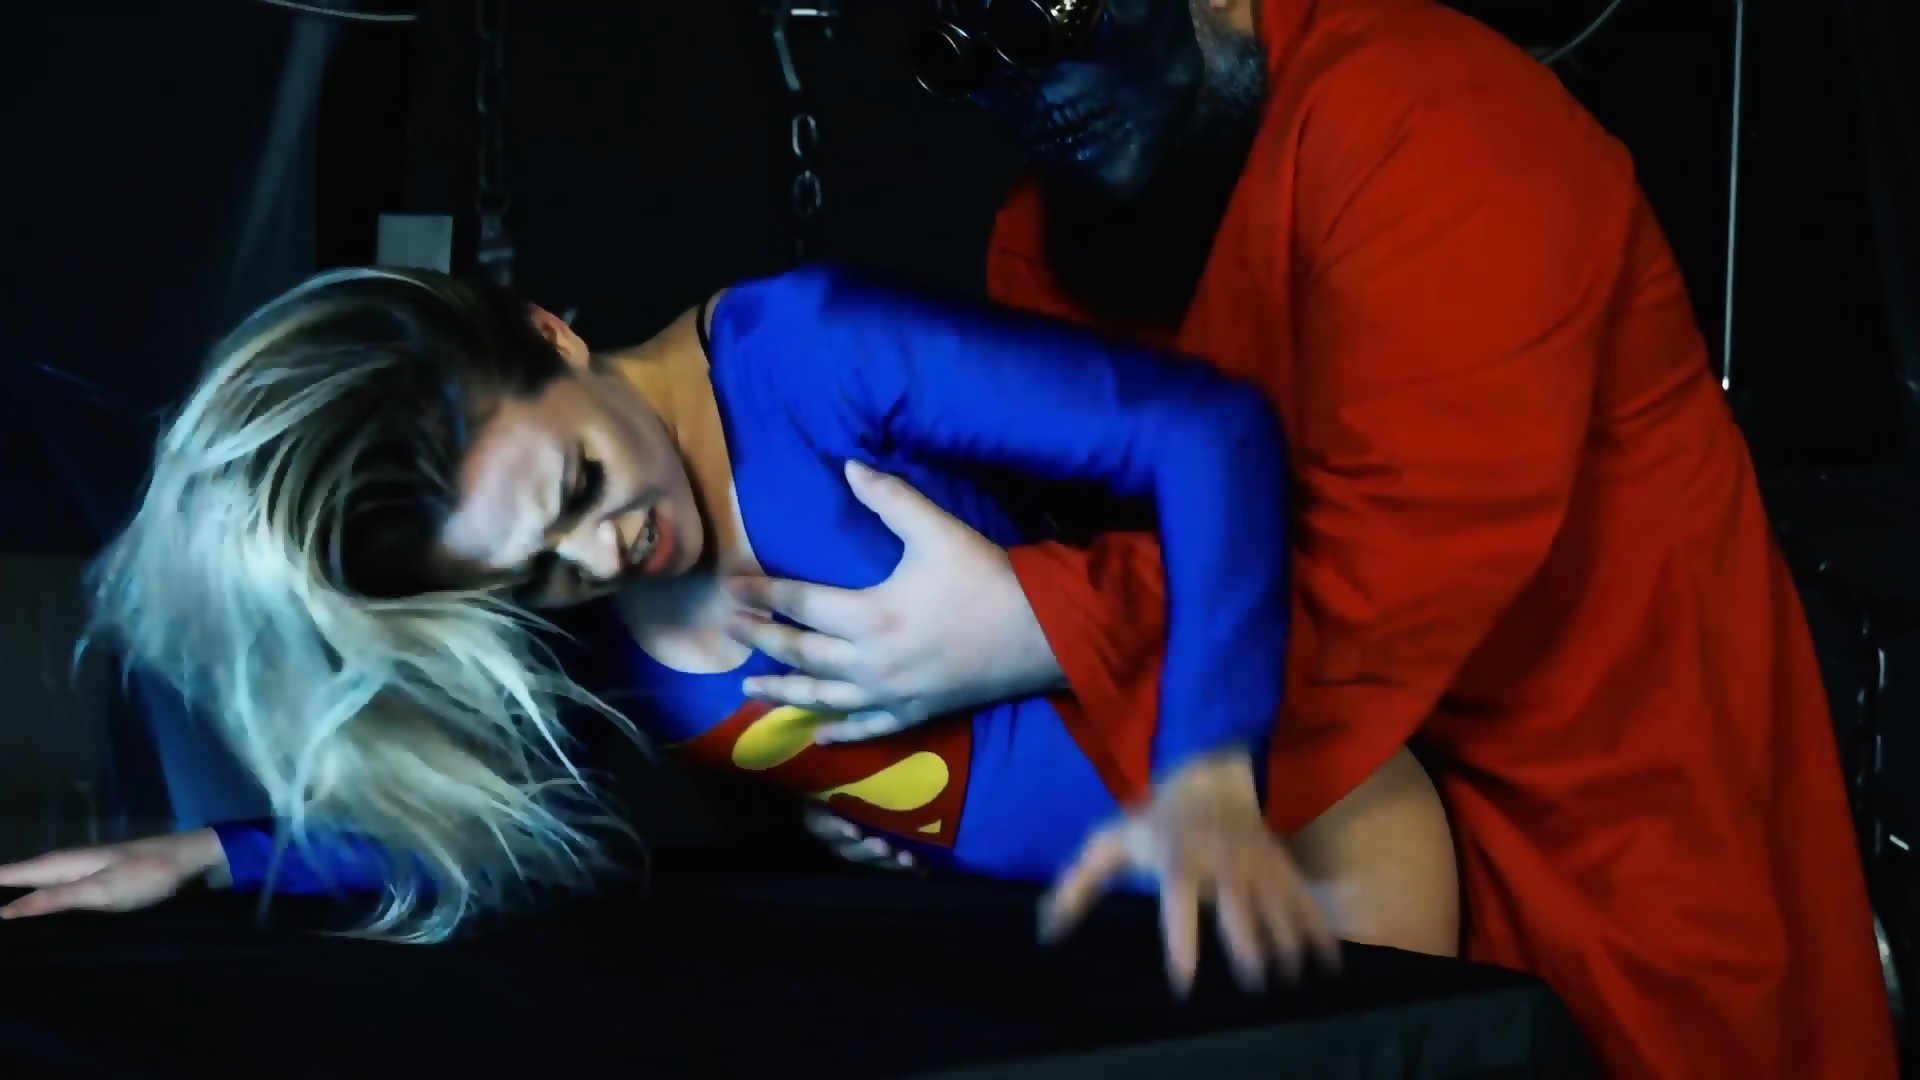 Supergirl Gets Powerless With The Mighty Dick - EPORNER